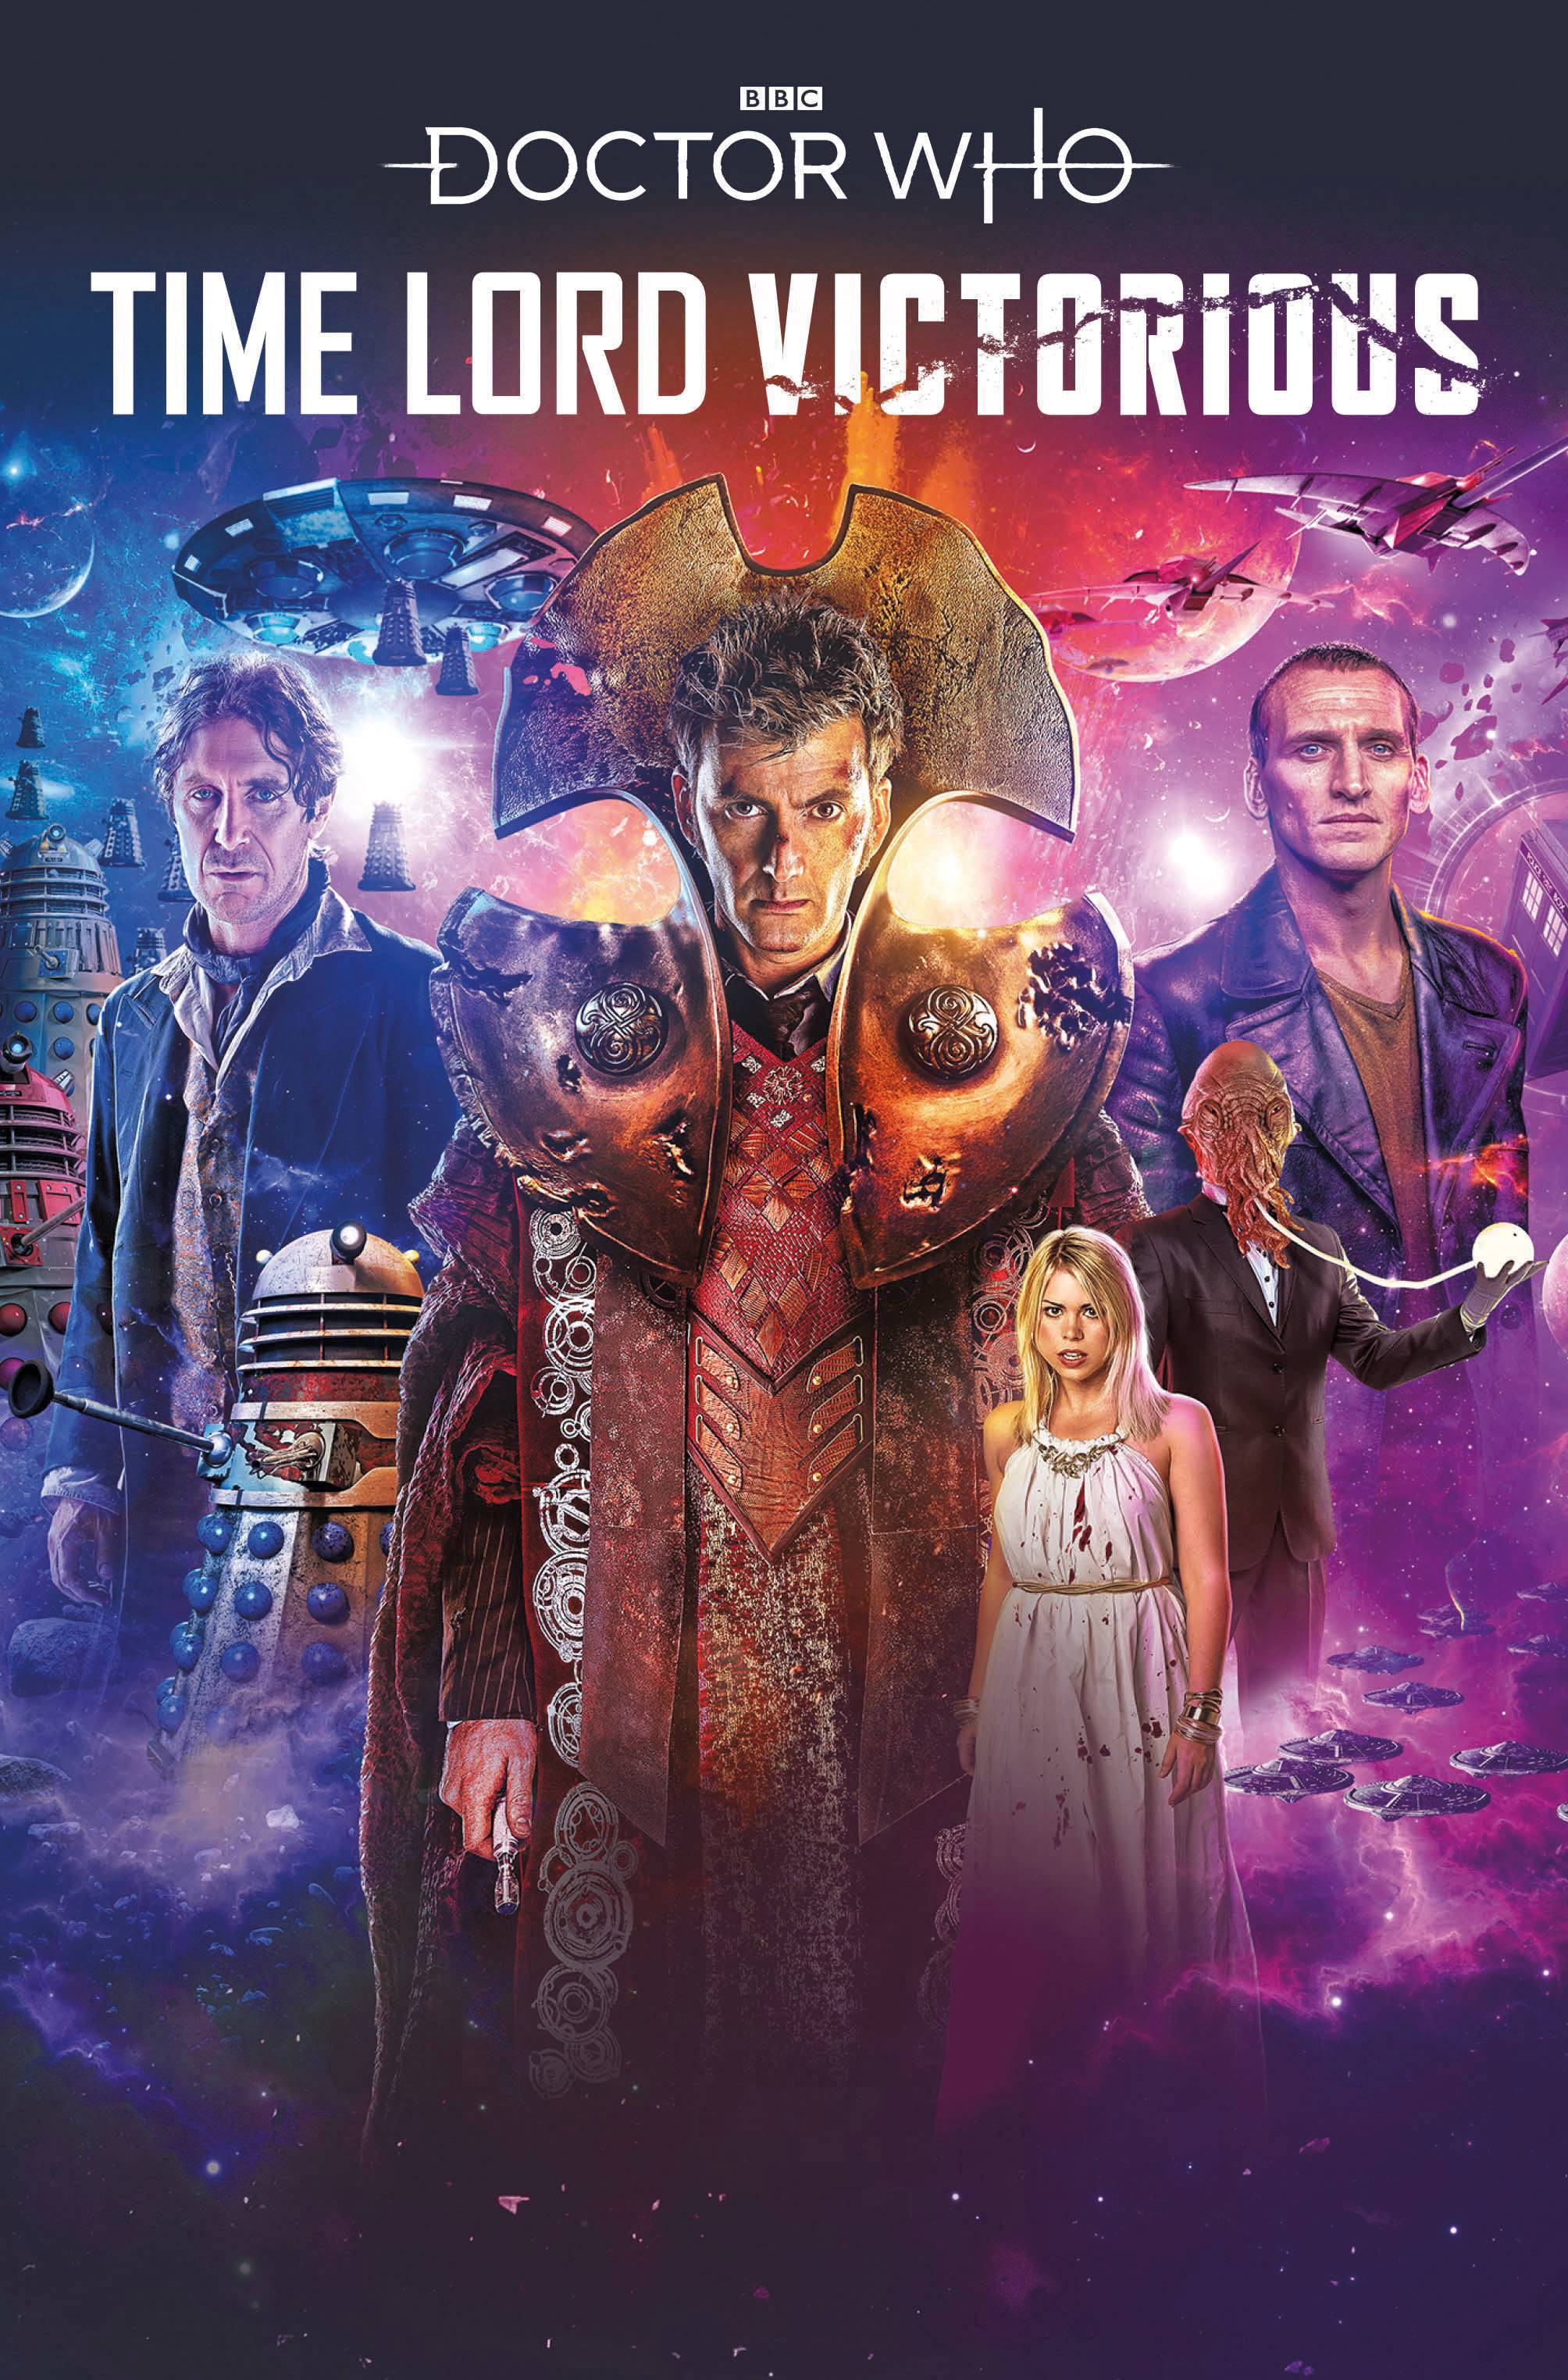 Doctor Who Time Lord Victorious vol 1: Defender Of The Daleks s/c